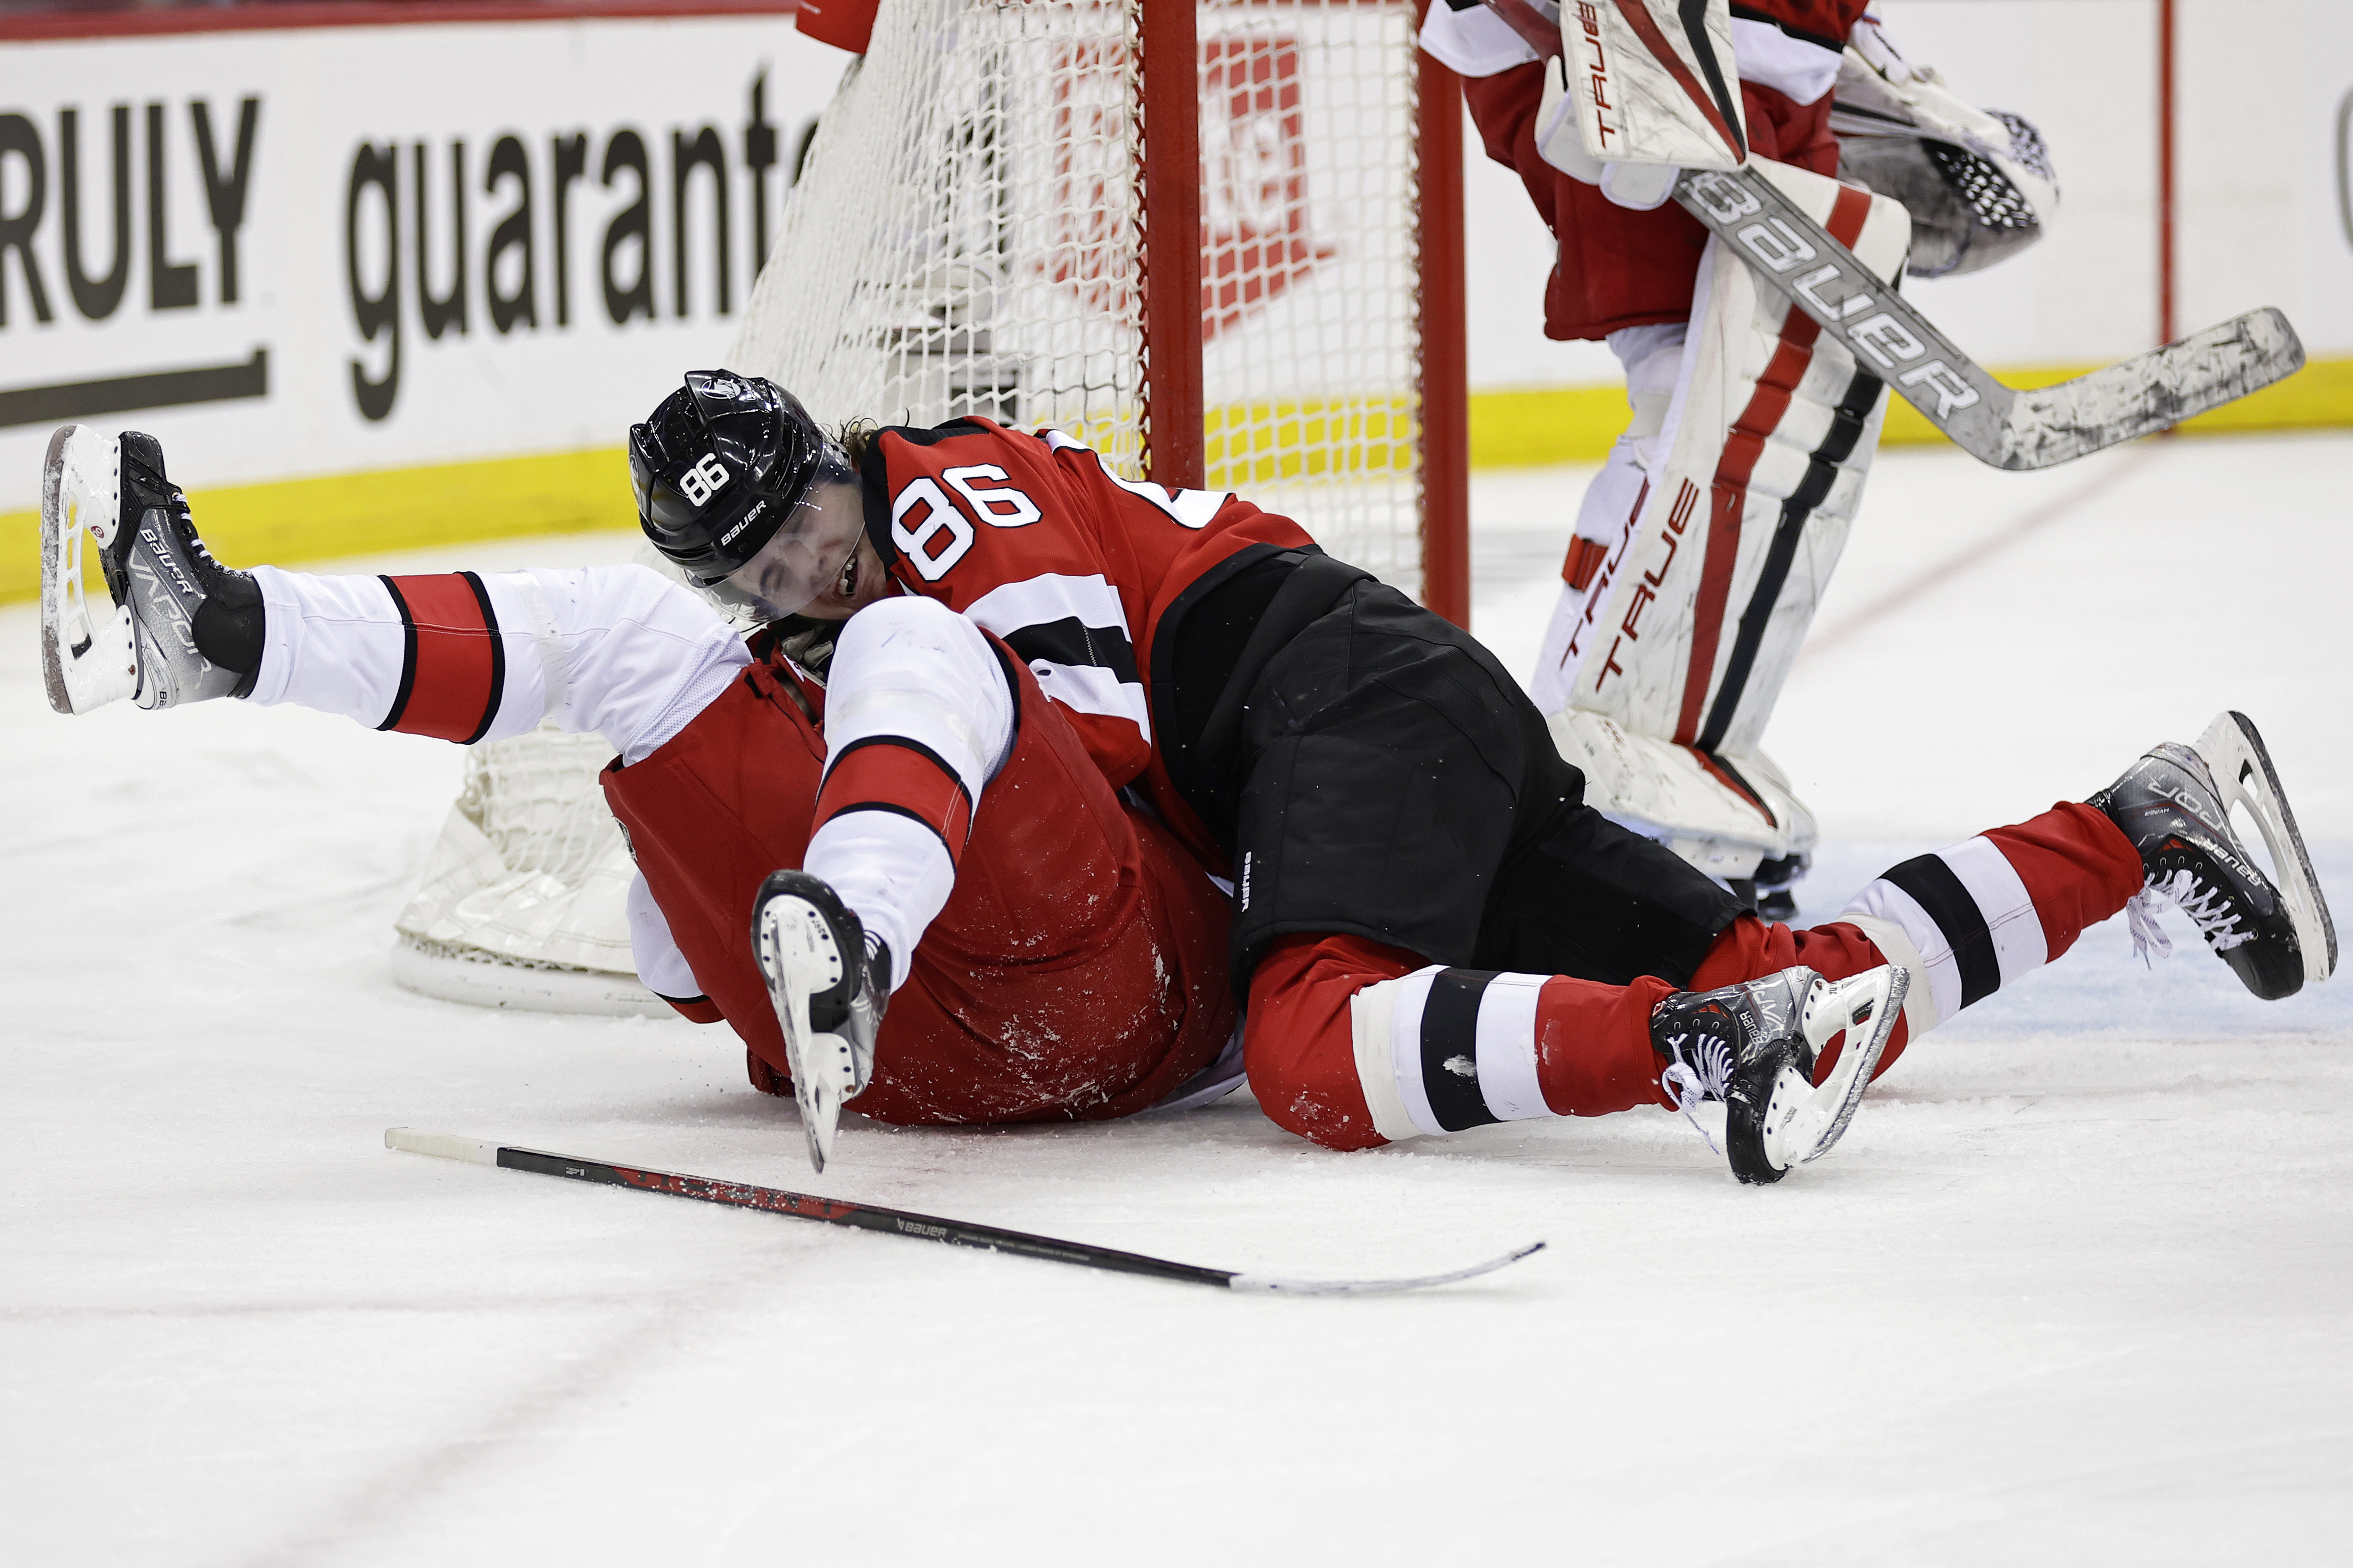 NHL: Devils have three goals ruled off in loss to Maple Leafs